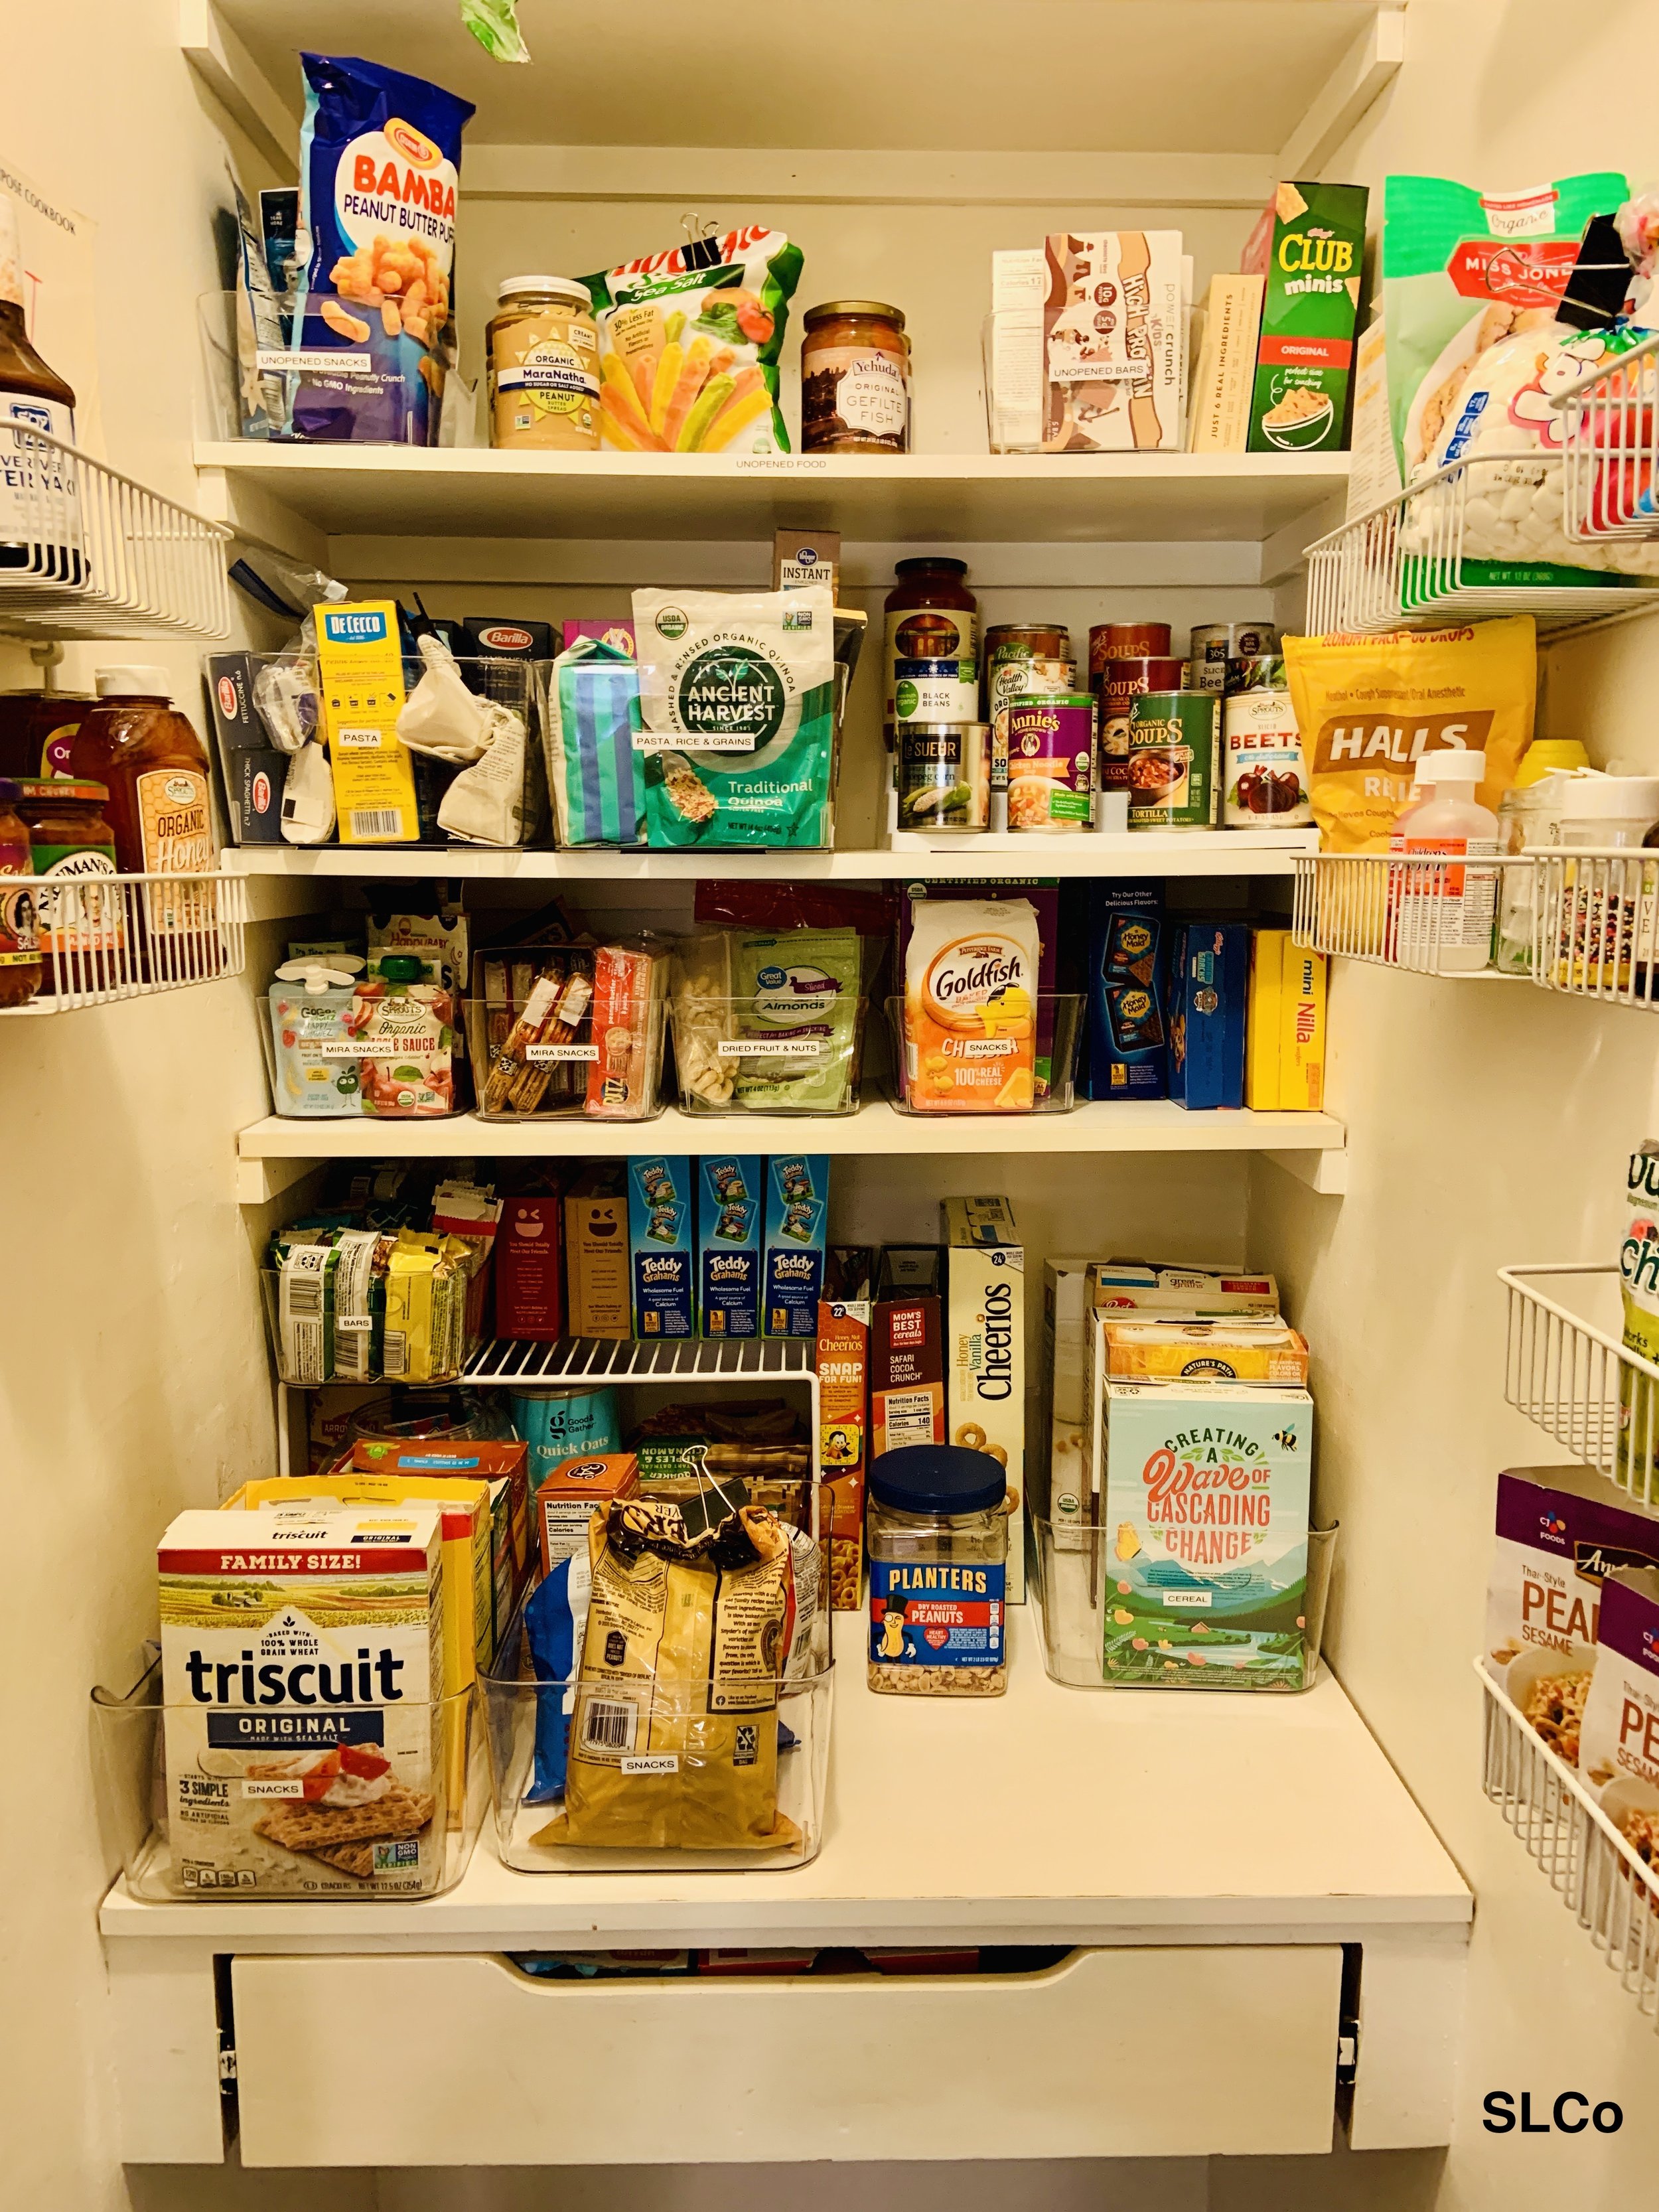 Kitchen pantry with 5 shelves of food items organized by category